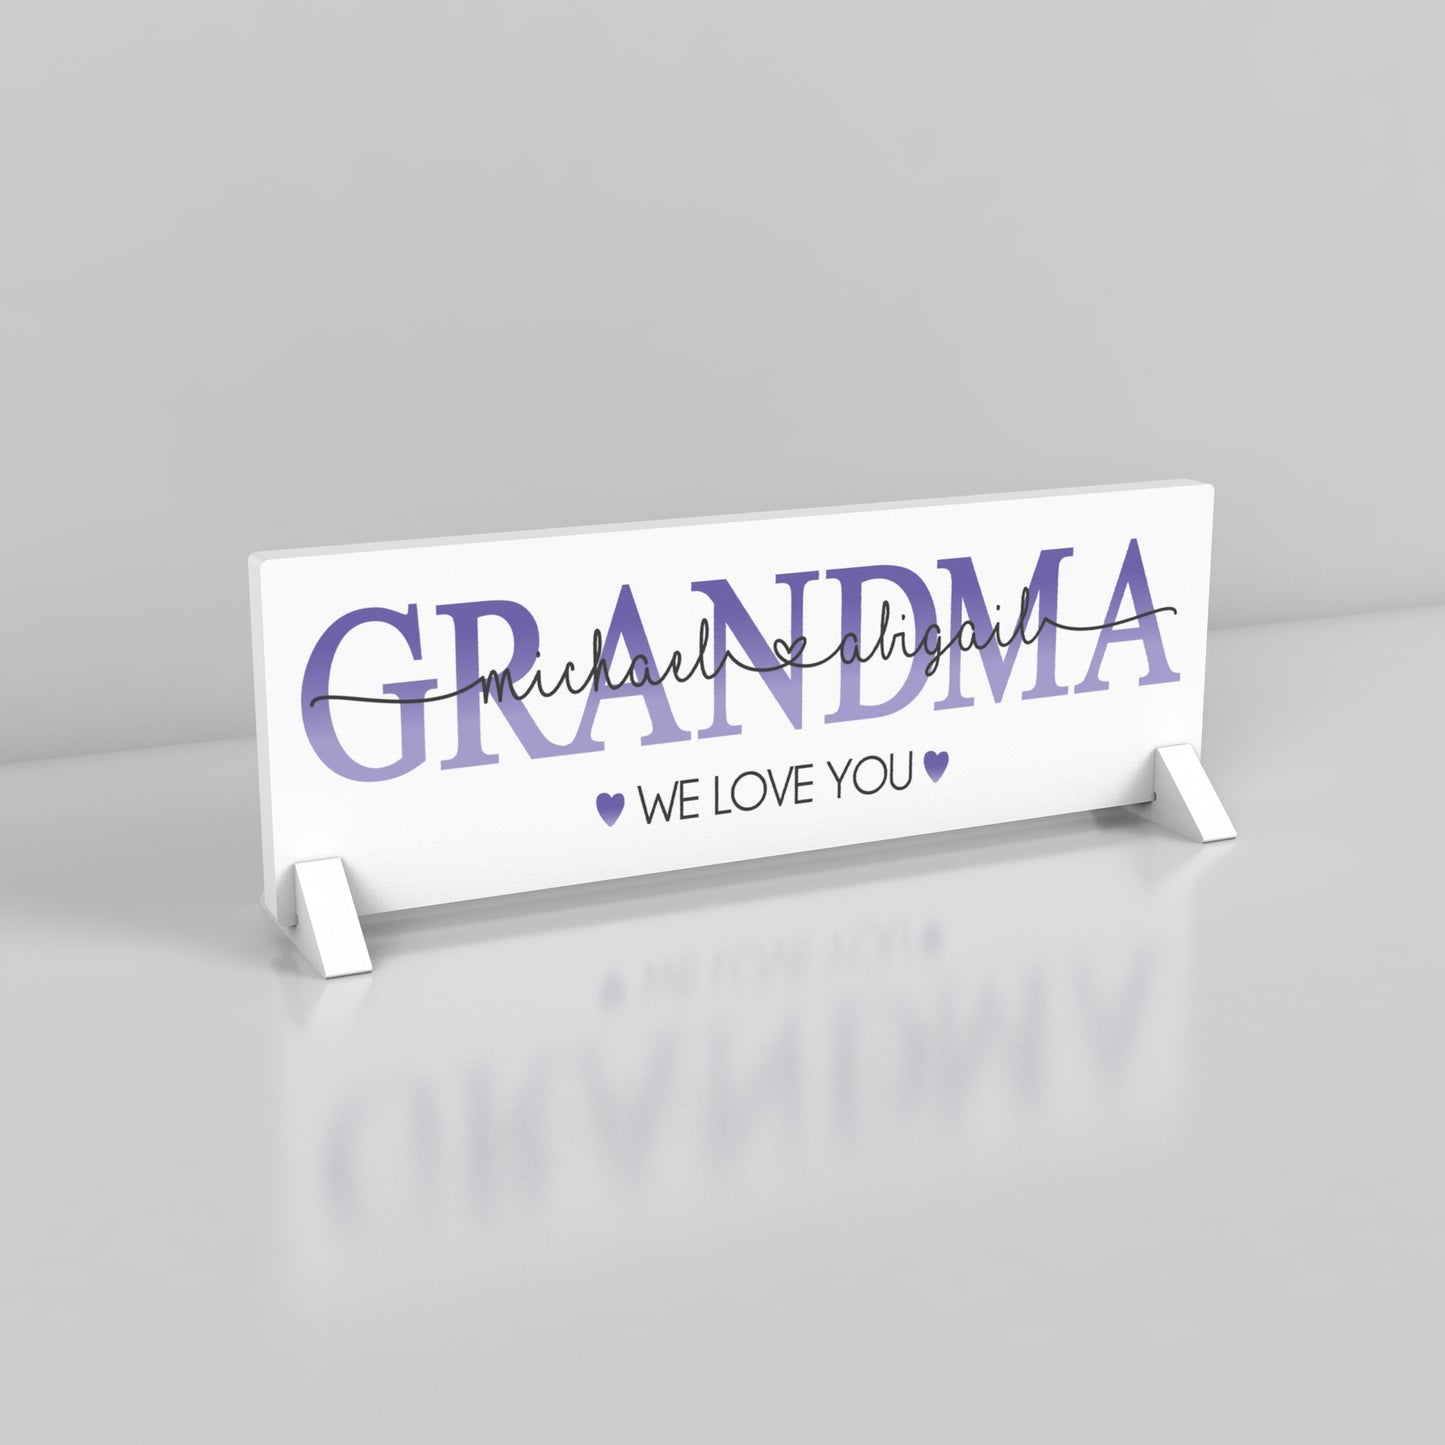 Personalized Mother's Day Gift From Kids, Grandma Sign, Mother's Day Gift, Gift Idea for Grandma